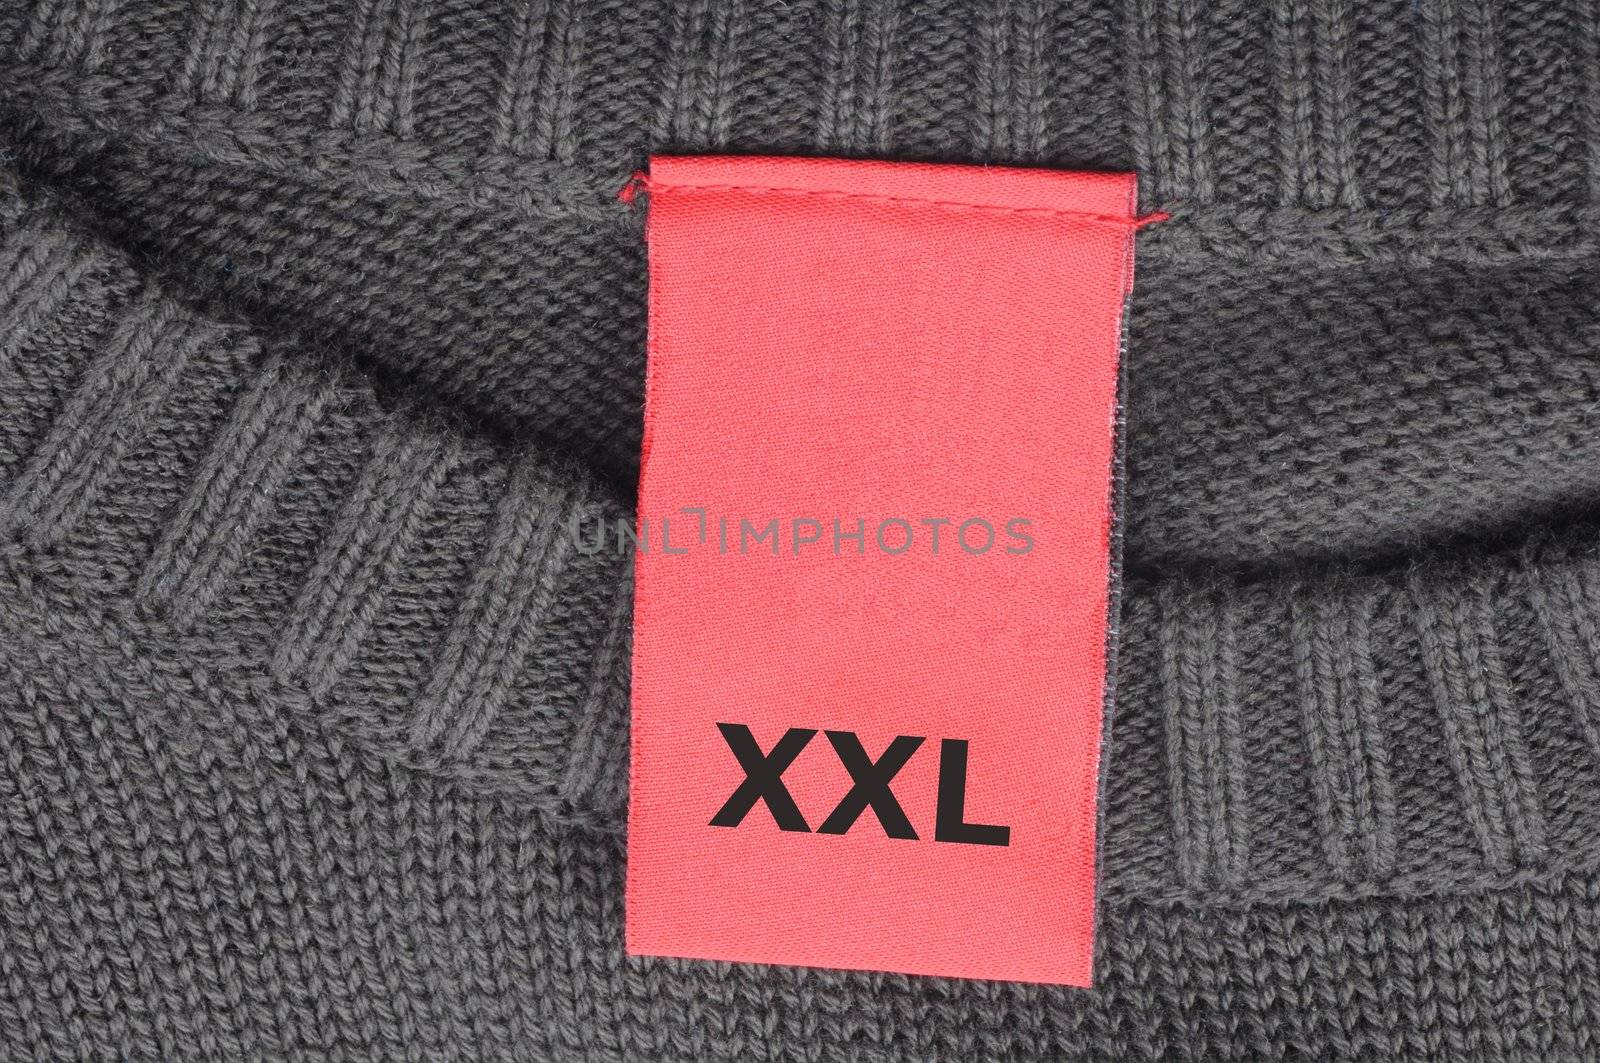 xxl fashion with copyspace in a blank label